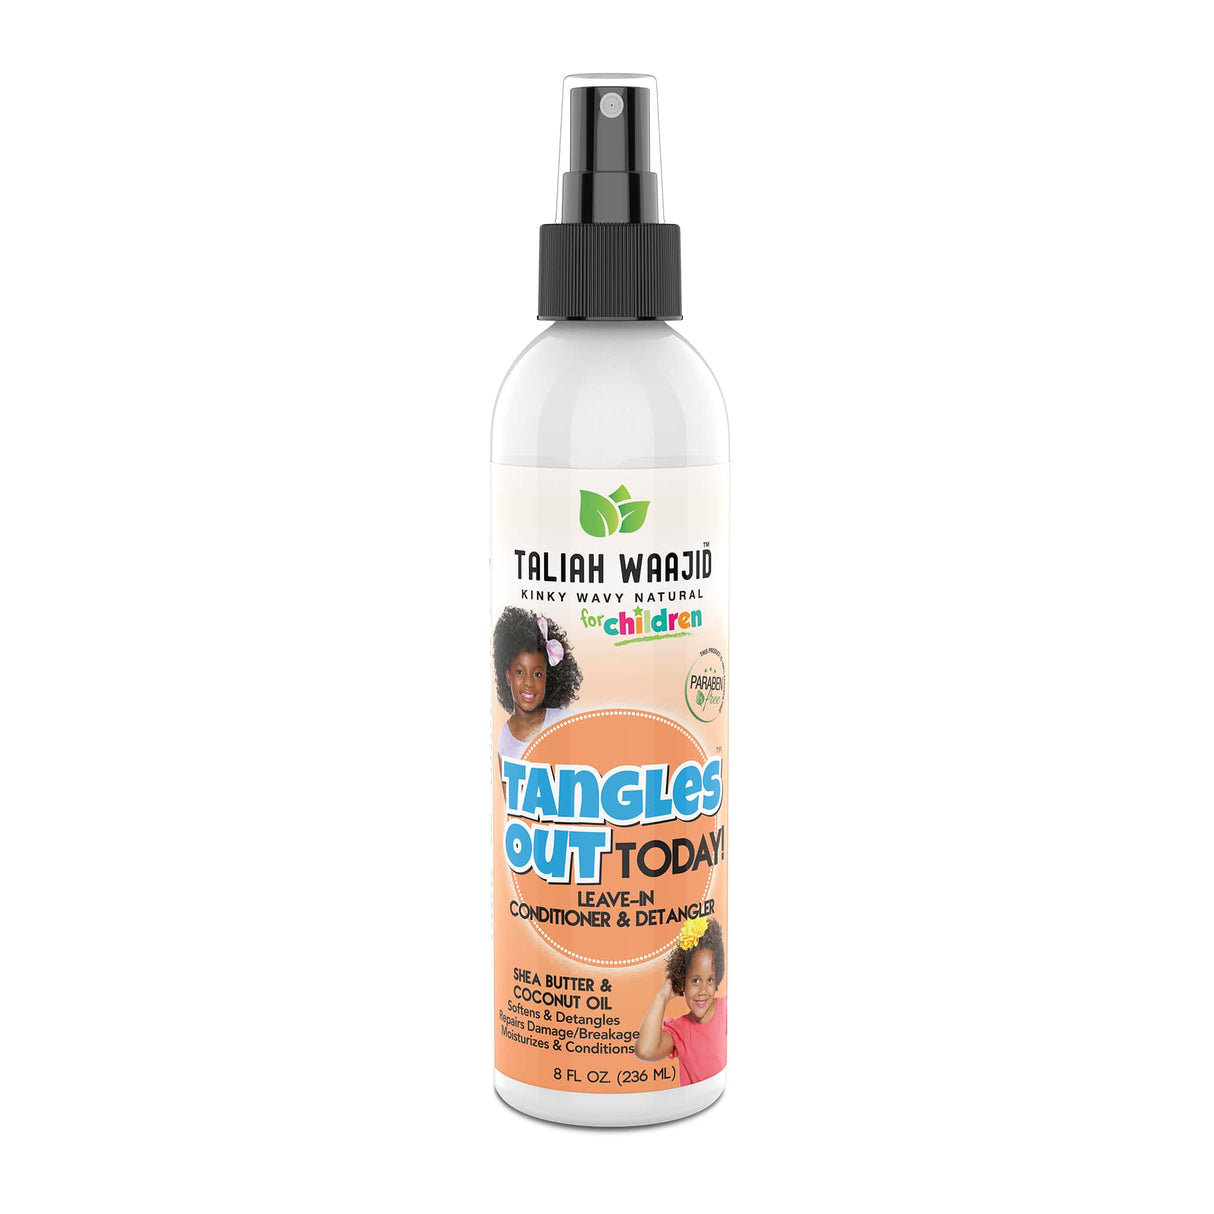 Taliah Waajid™ Kinky Wavy Natural for Children Tangles Out Today